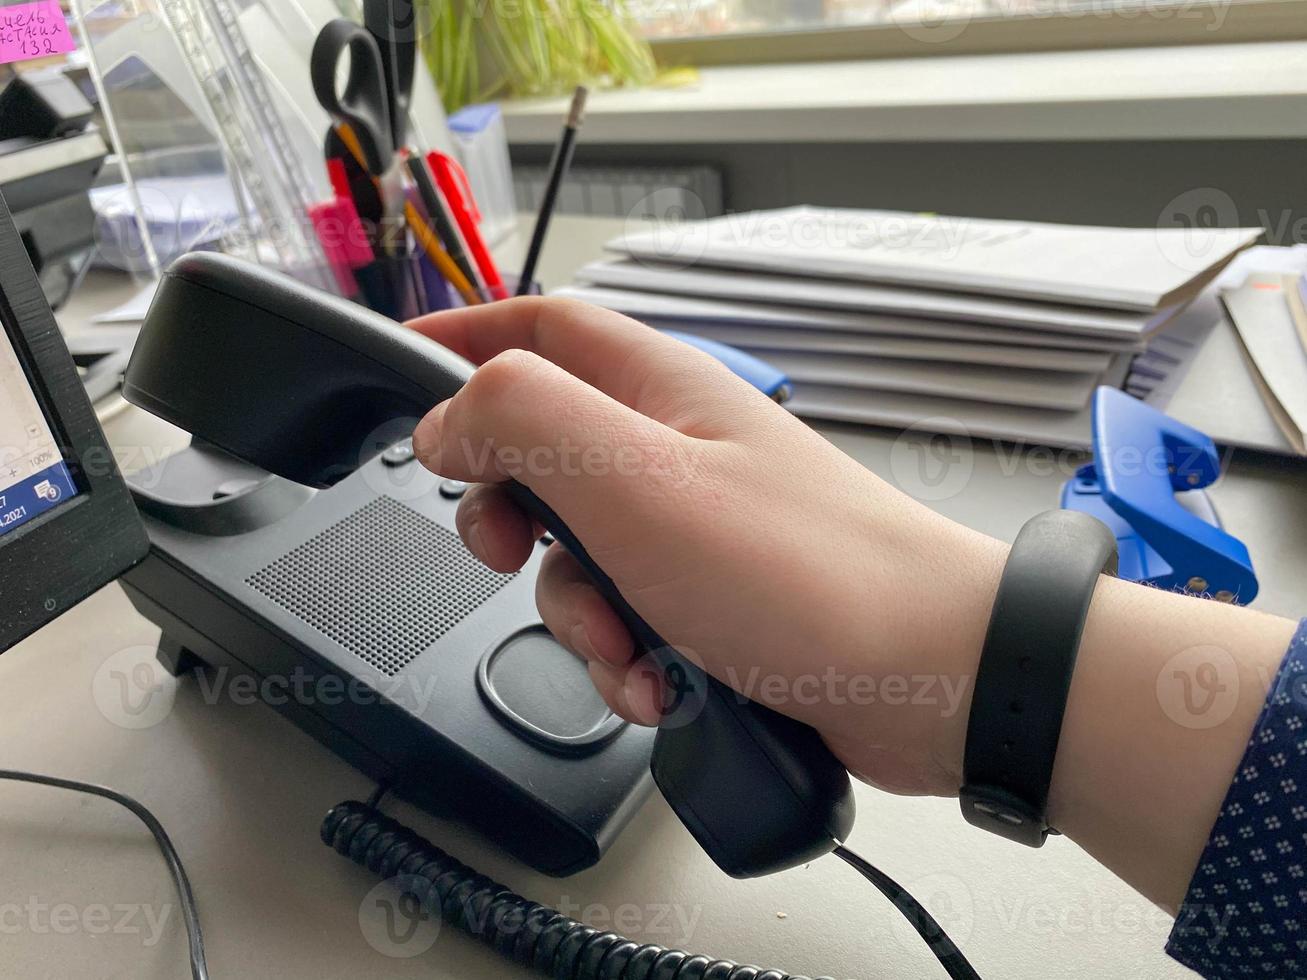 A man's hand in a shirt holds a landline phone receiver on a work desk with office supplies in a business office photo